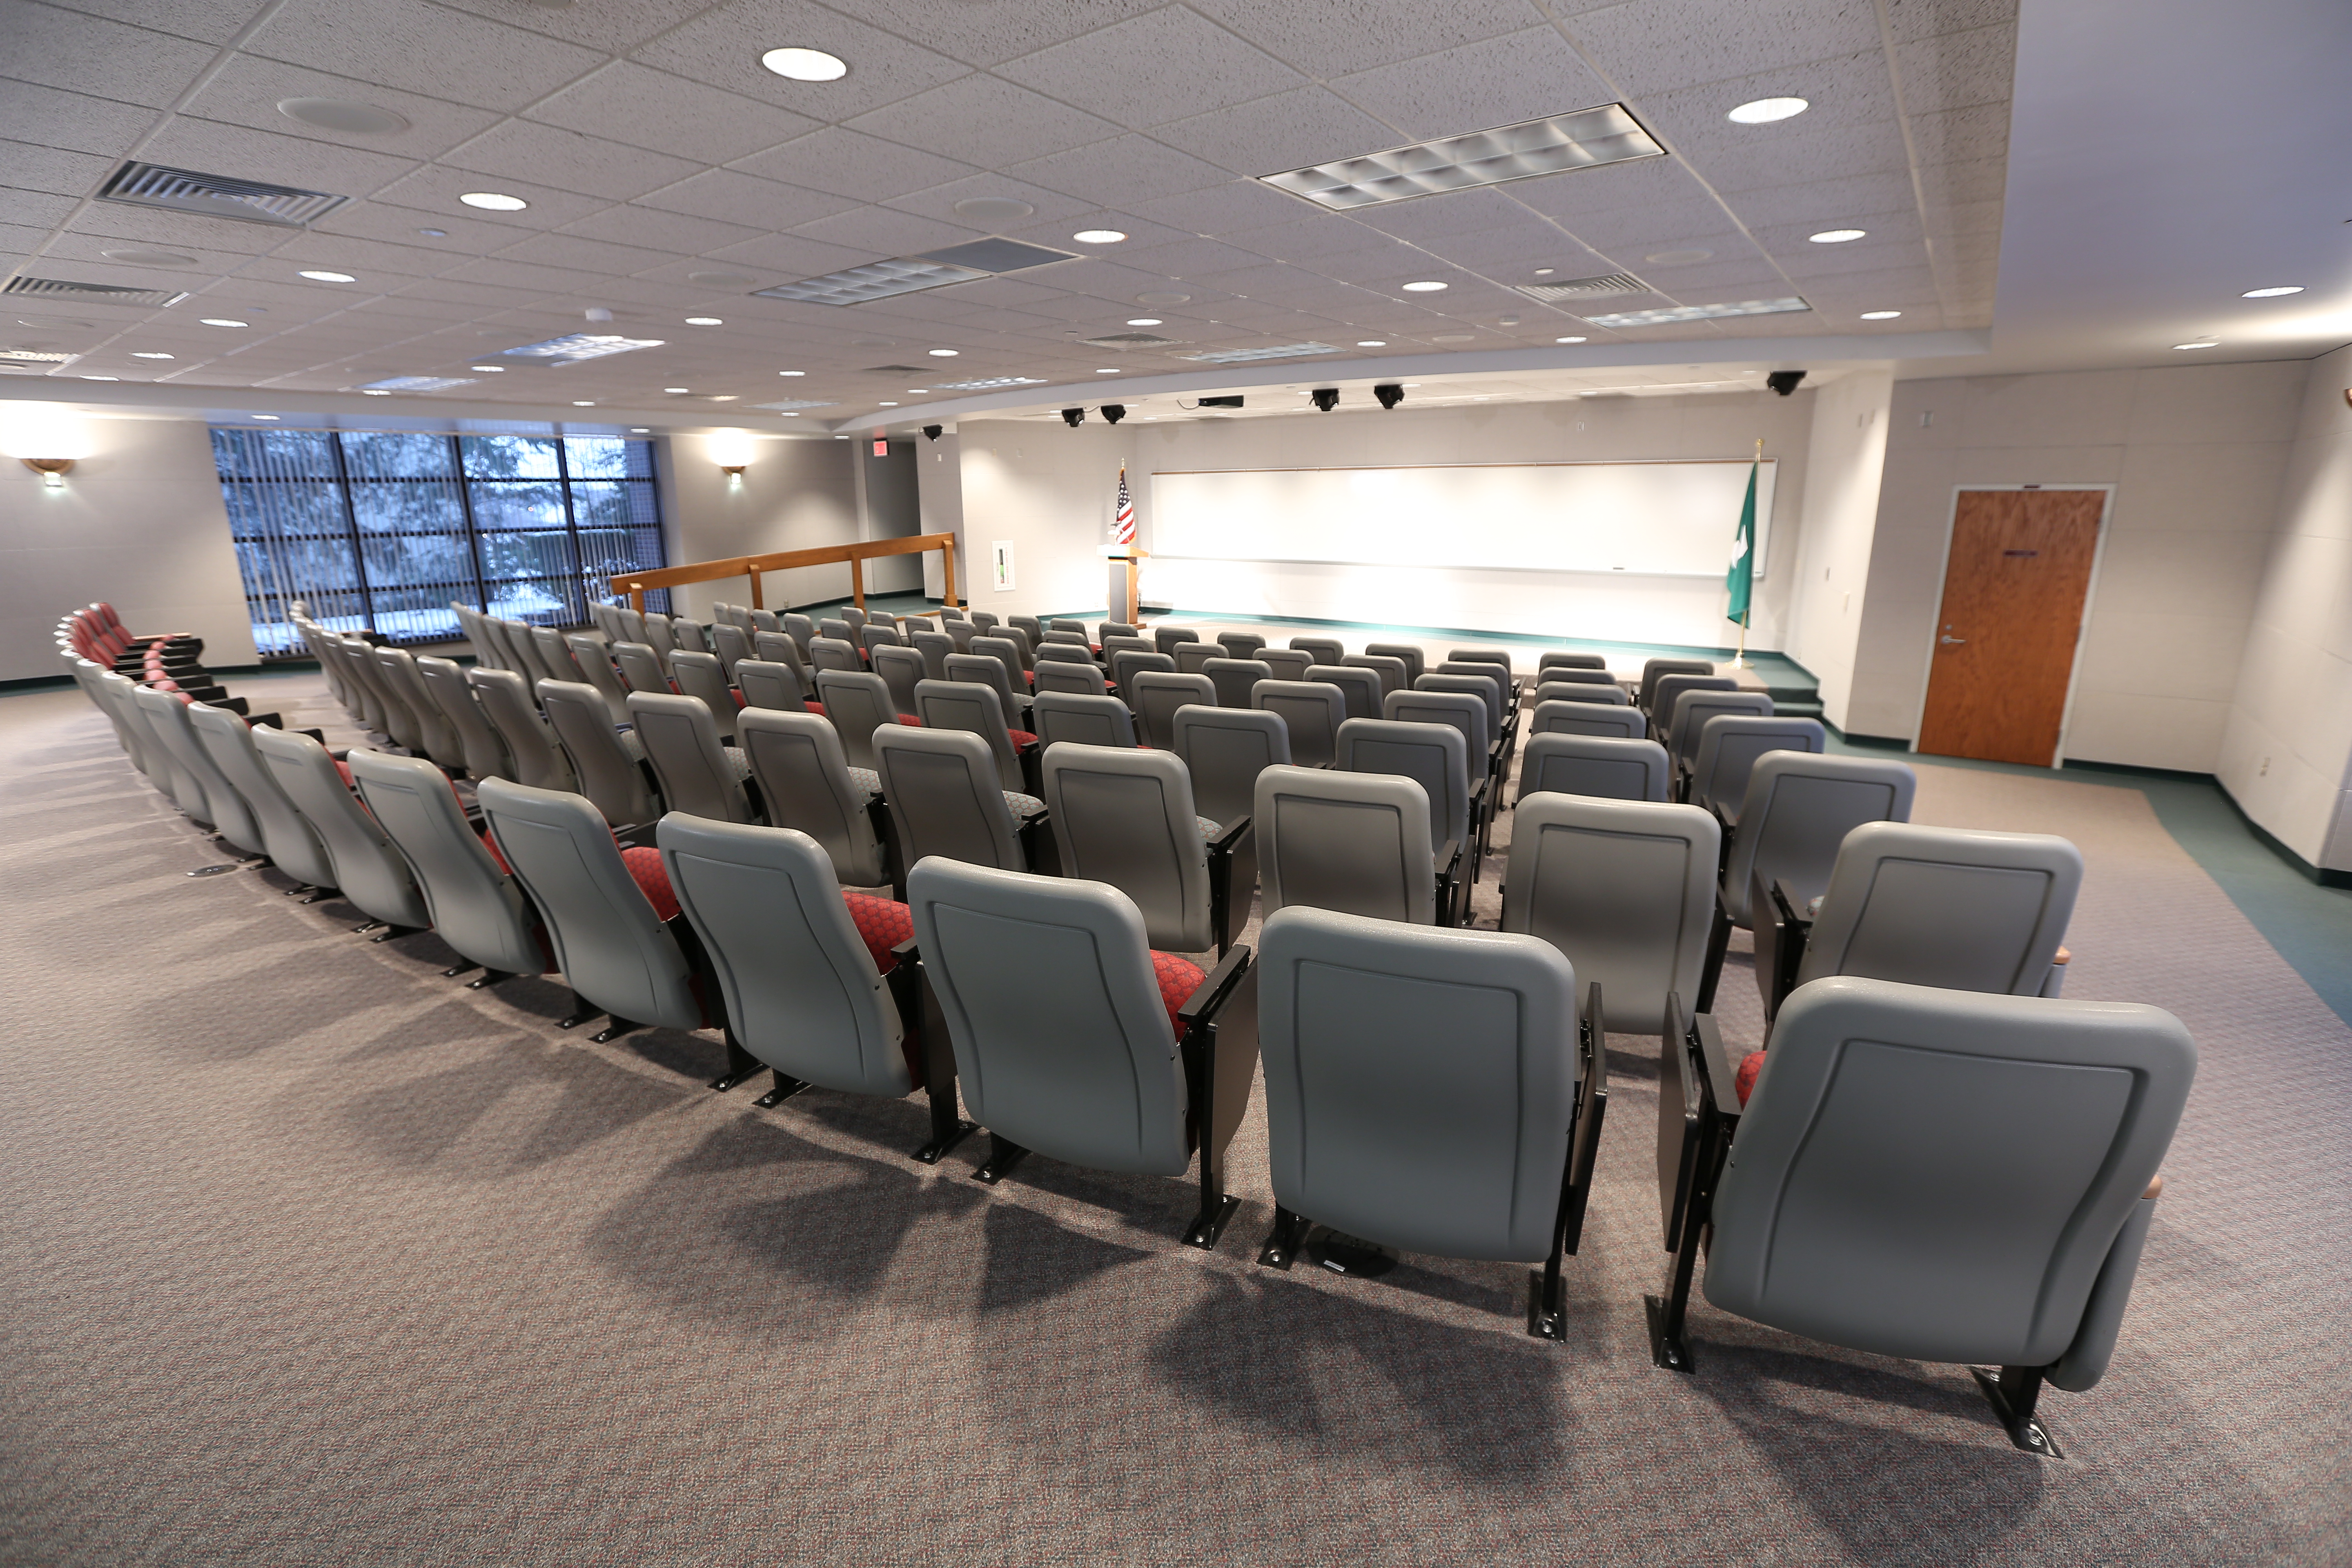 A rear view of the auditorium at the MSU Bioeconomy Instititue in Holland, Mich.